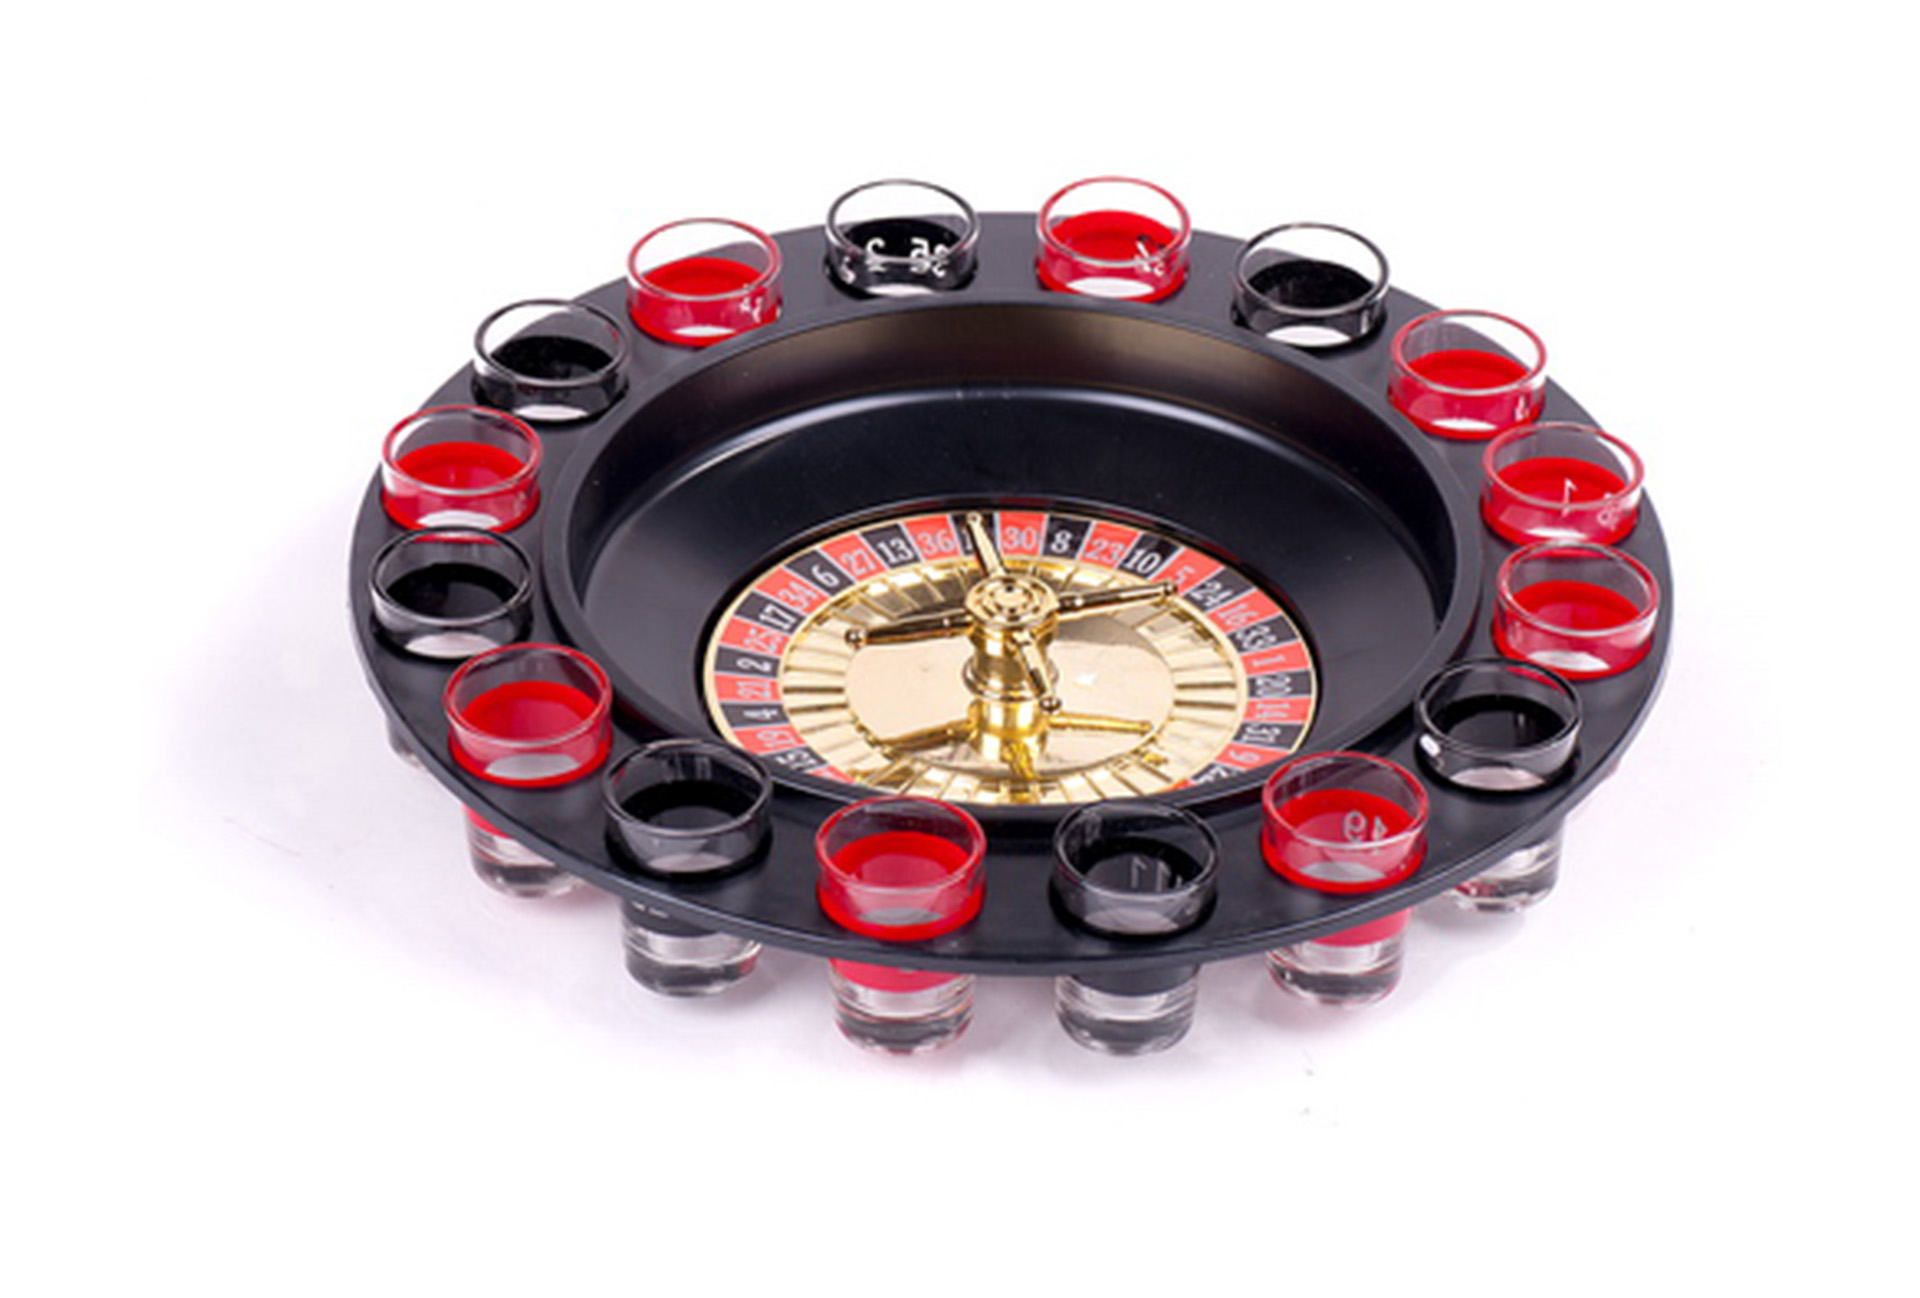 DK1211 DRINKING ROULETTE GAME